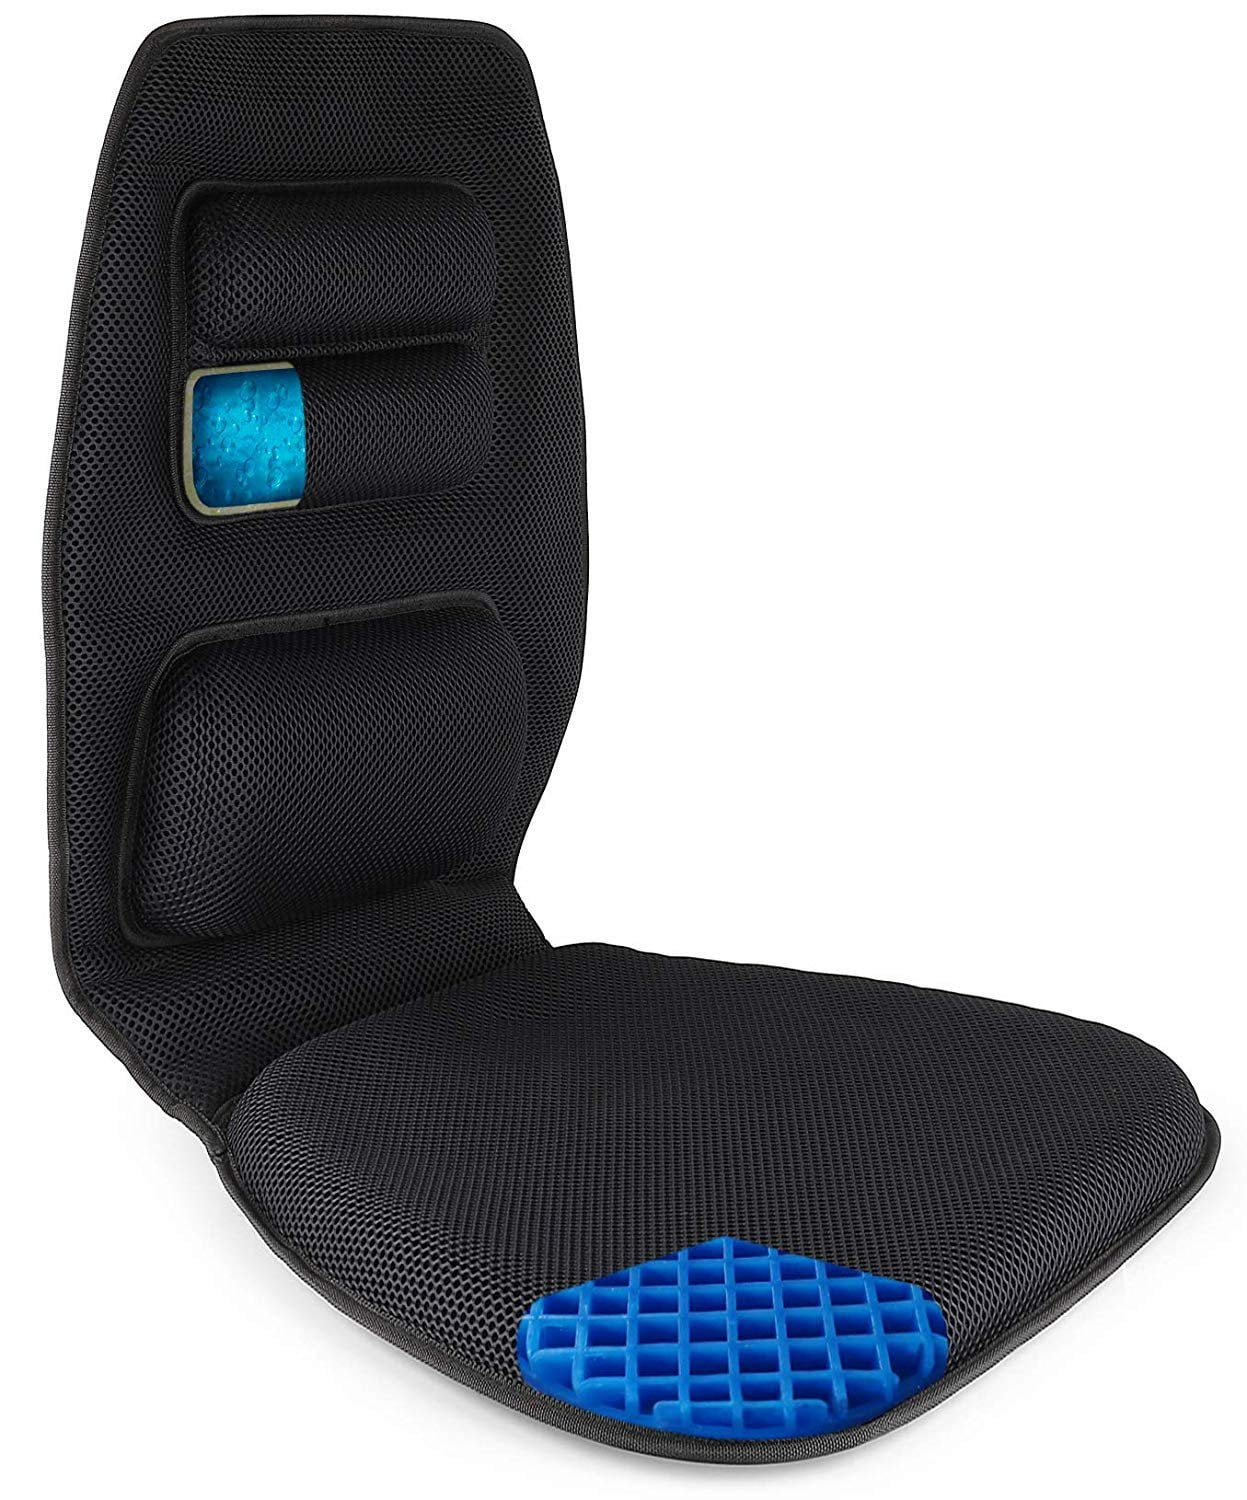 FOMI Premium Gel Cushion and Back Support Seat Cushion Pad